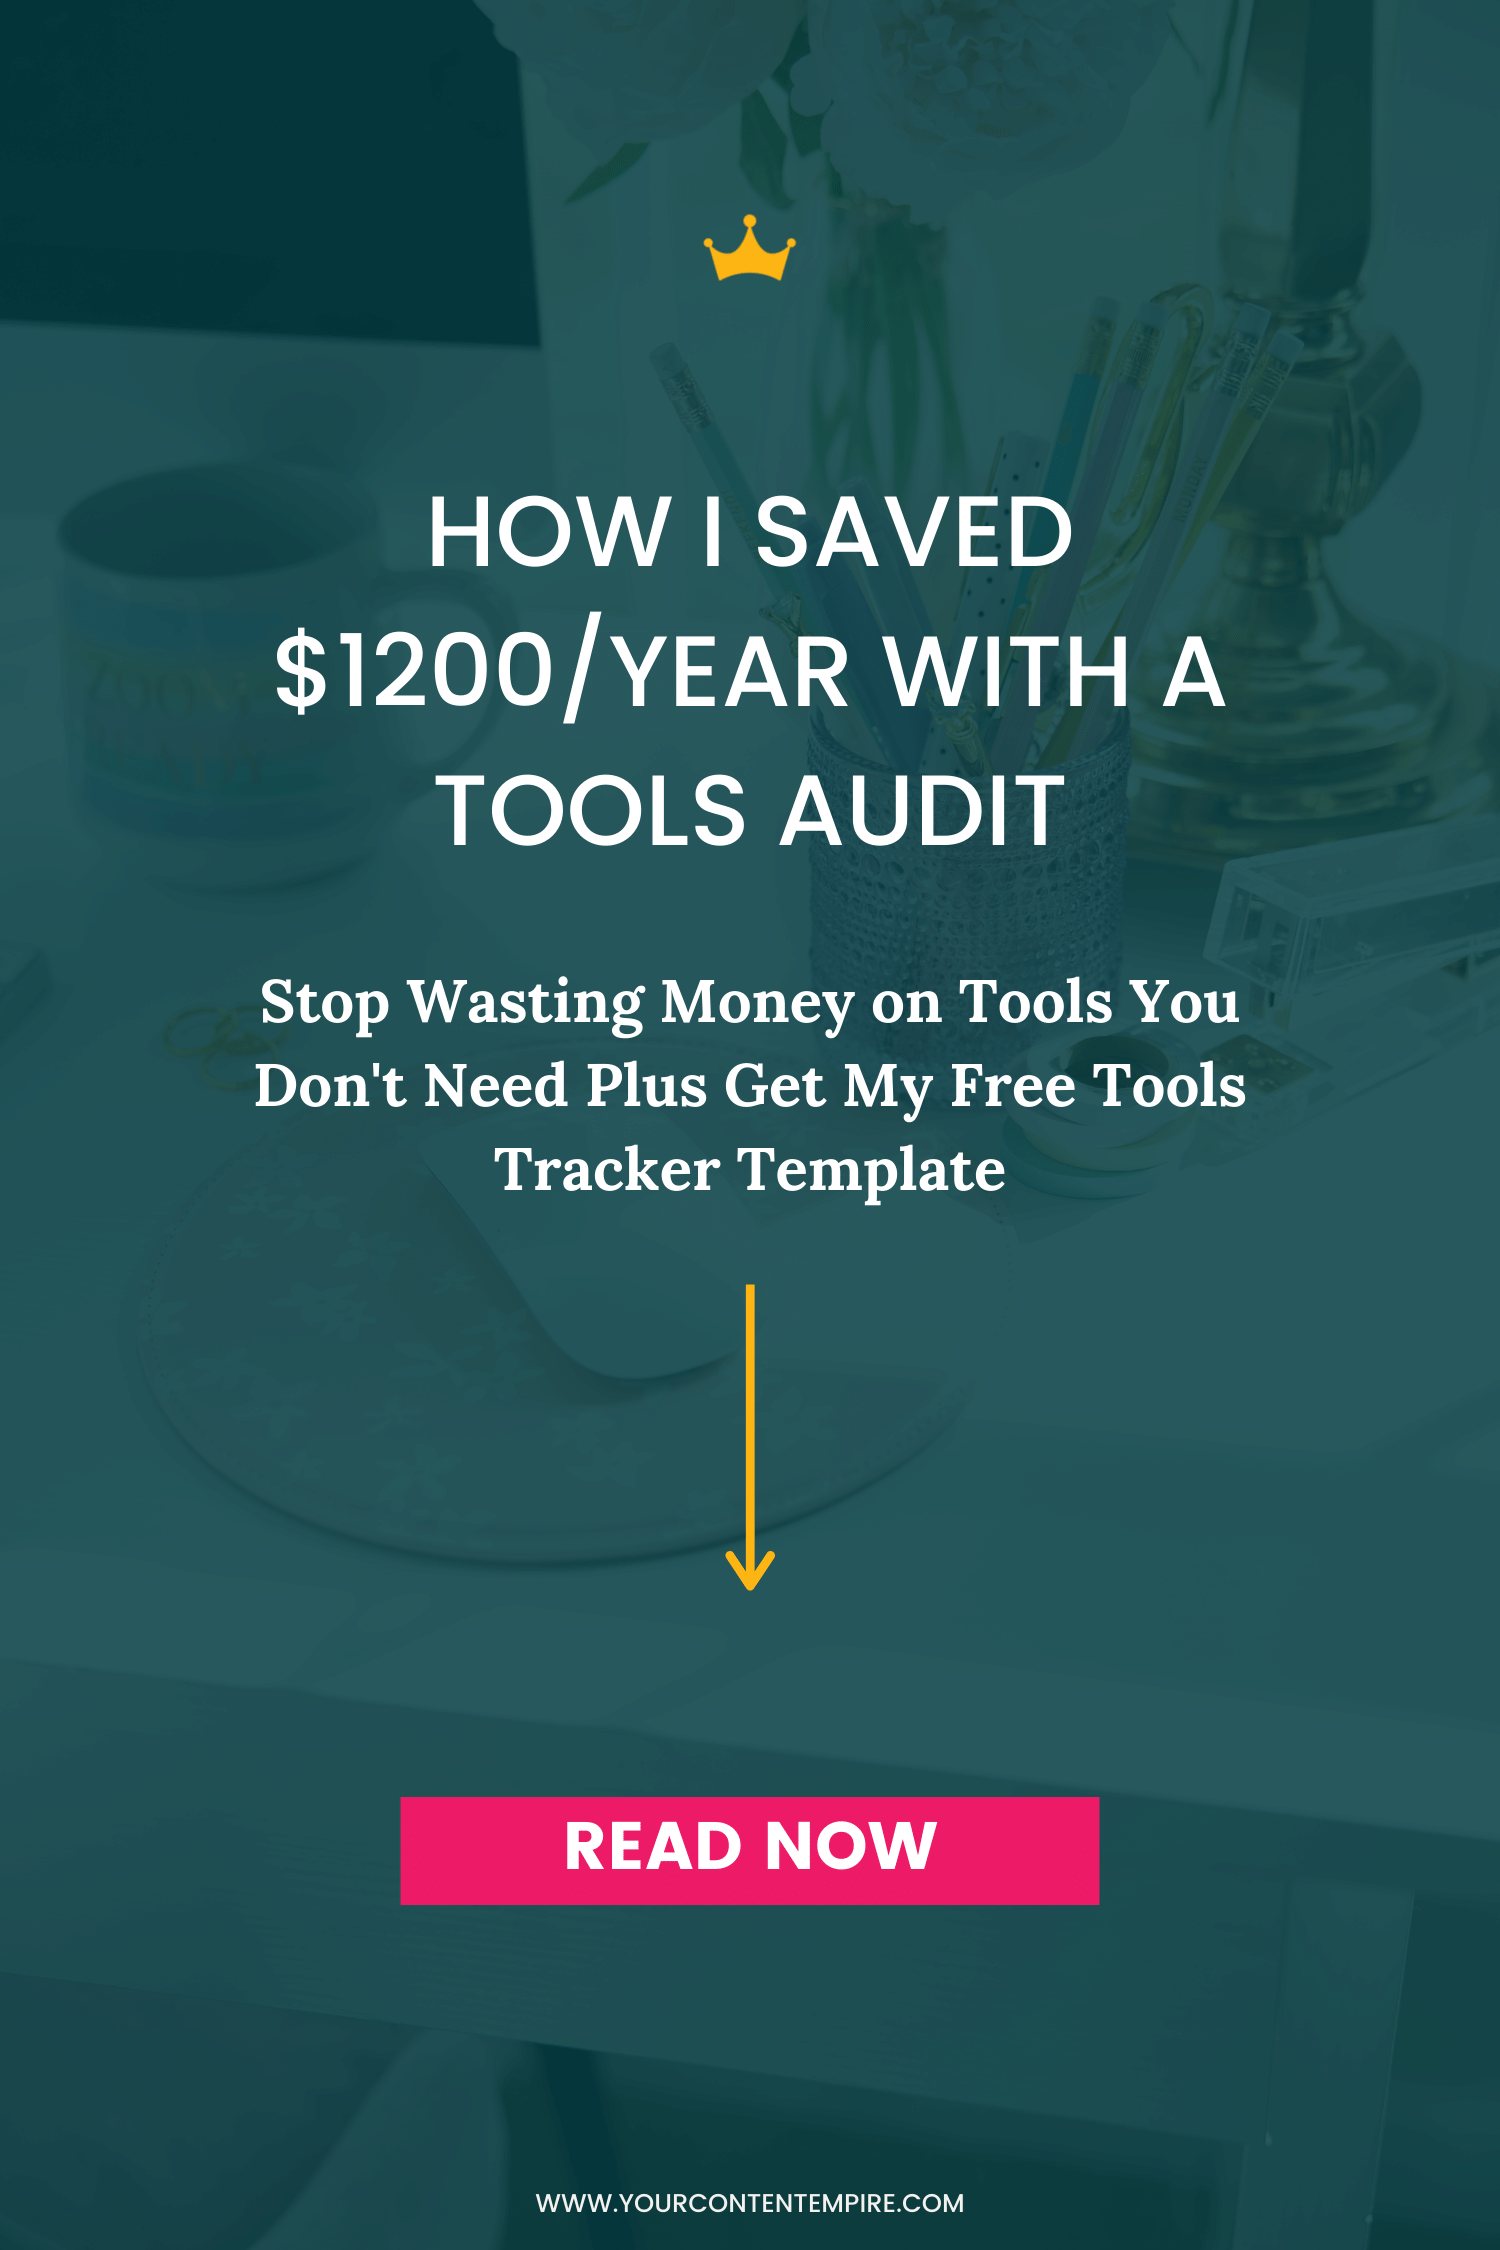 How I Saved $1200/Year With a Tools Audit